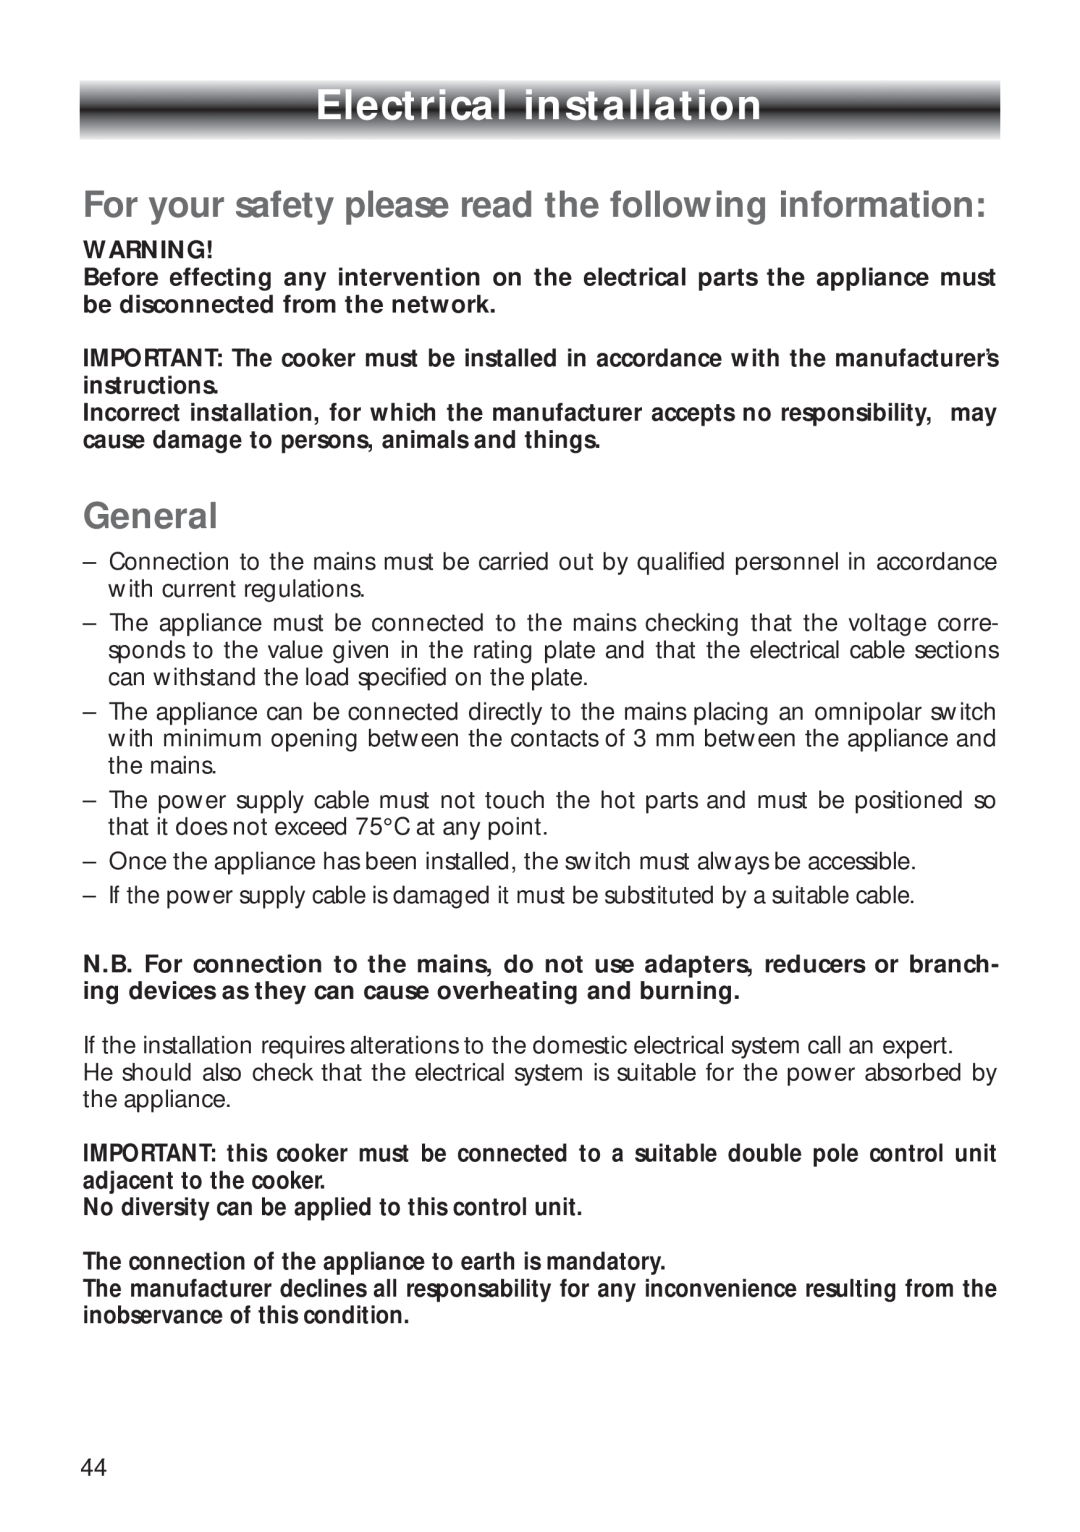 CDA RV 700 Electrical installation, For your safety please read the following information, General 